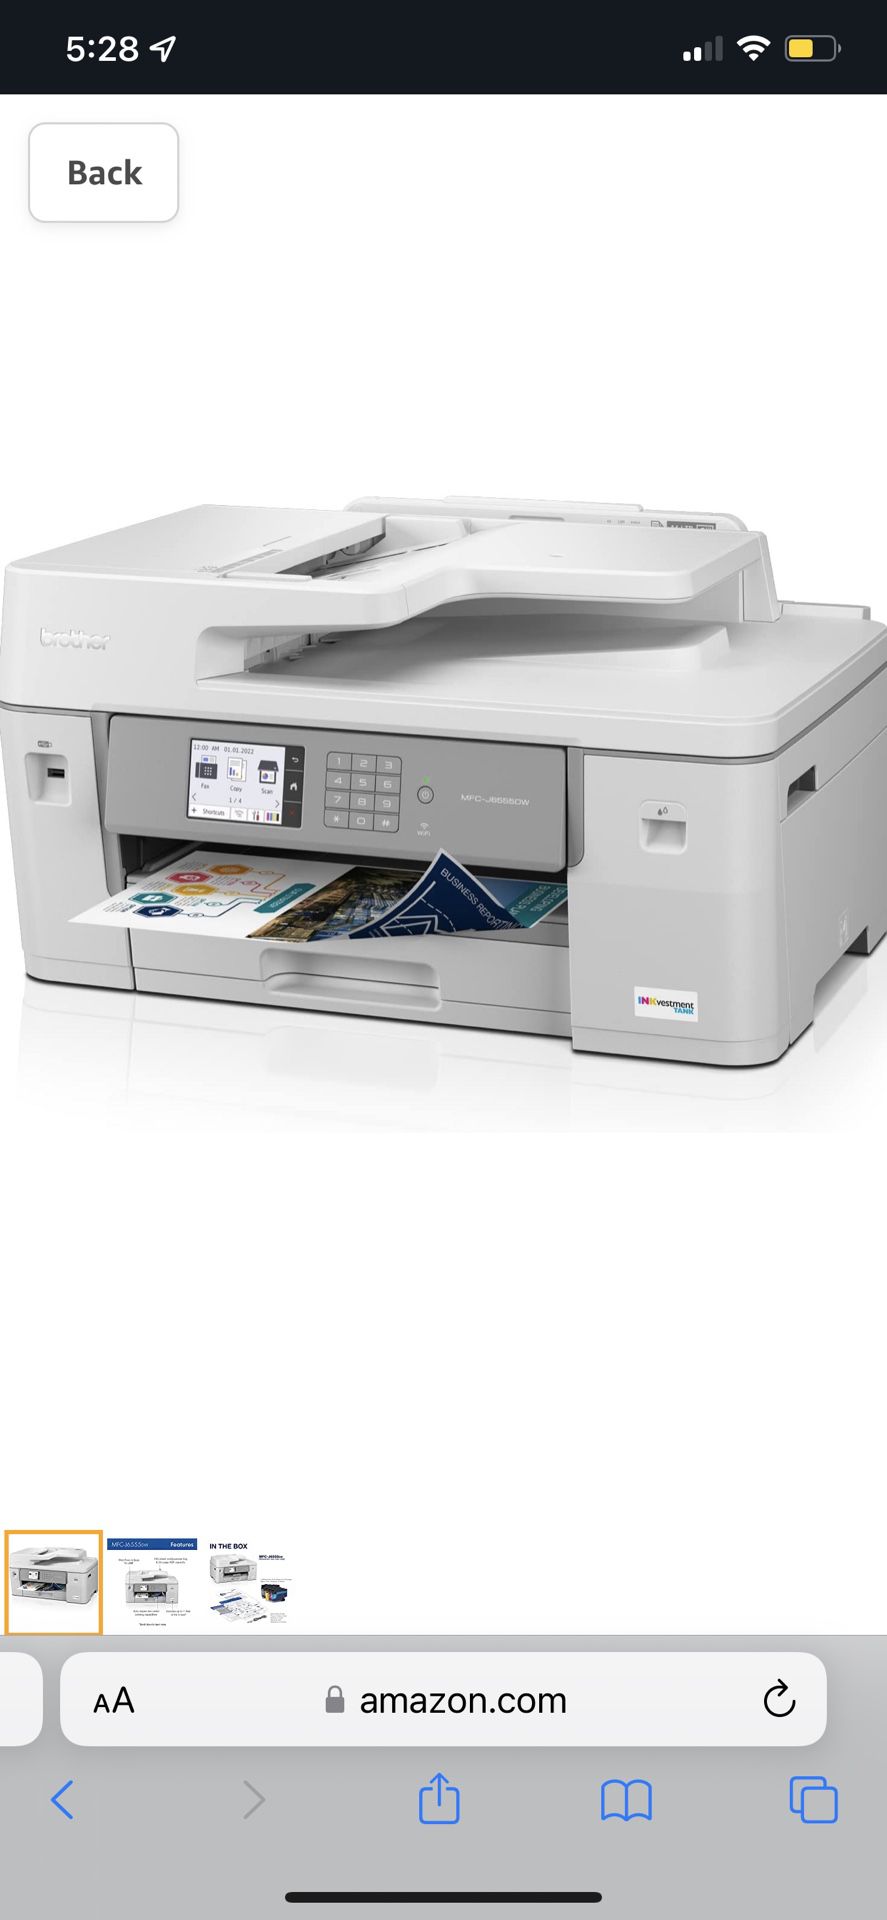 Brother MFC-J6555DW INKvestment Tank Color Inkjet All-in-One Printer with up to 1 Year of Ink in-box1 and 11” x 17” Print, Copy, scan, and fax Capabil